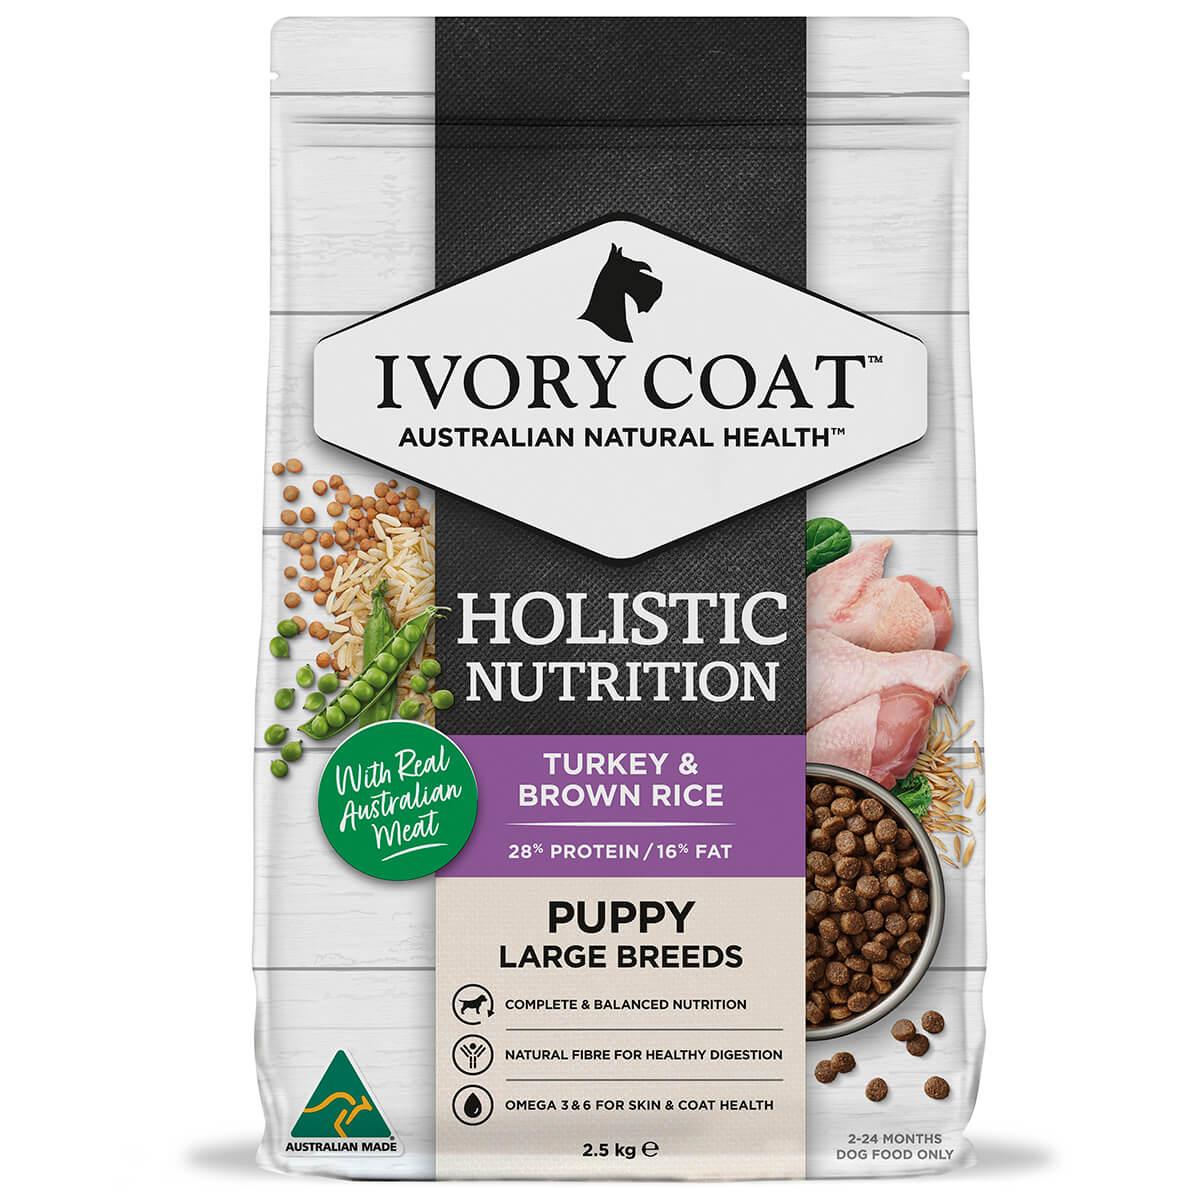 Ivory Coat Holistic Nutrition Large Breed Puppy Turkey & Brown Rice Dry Dog Food